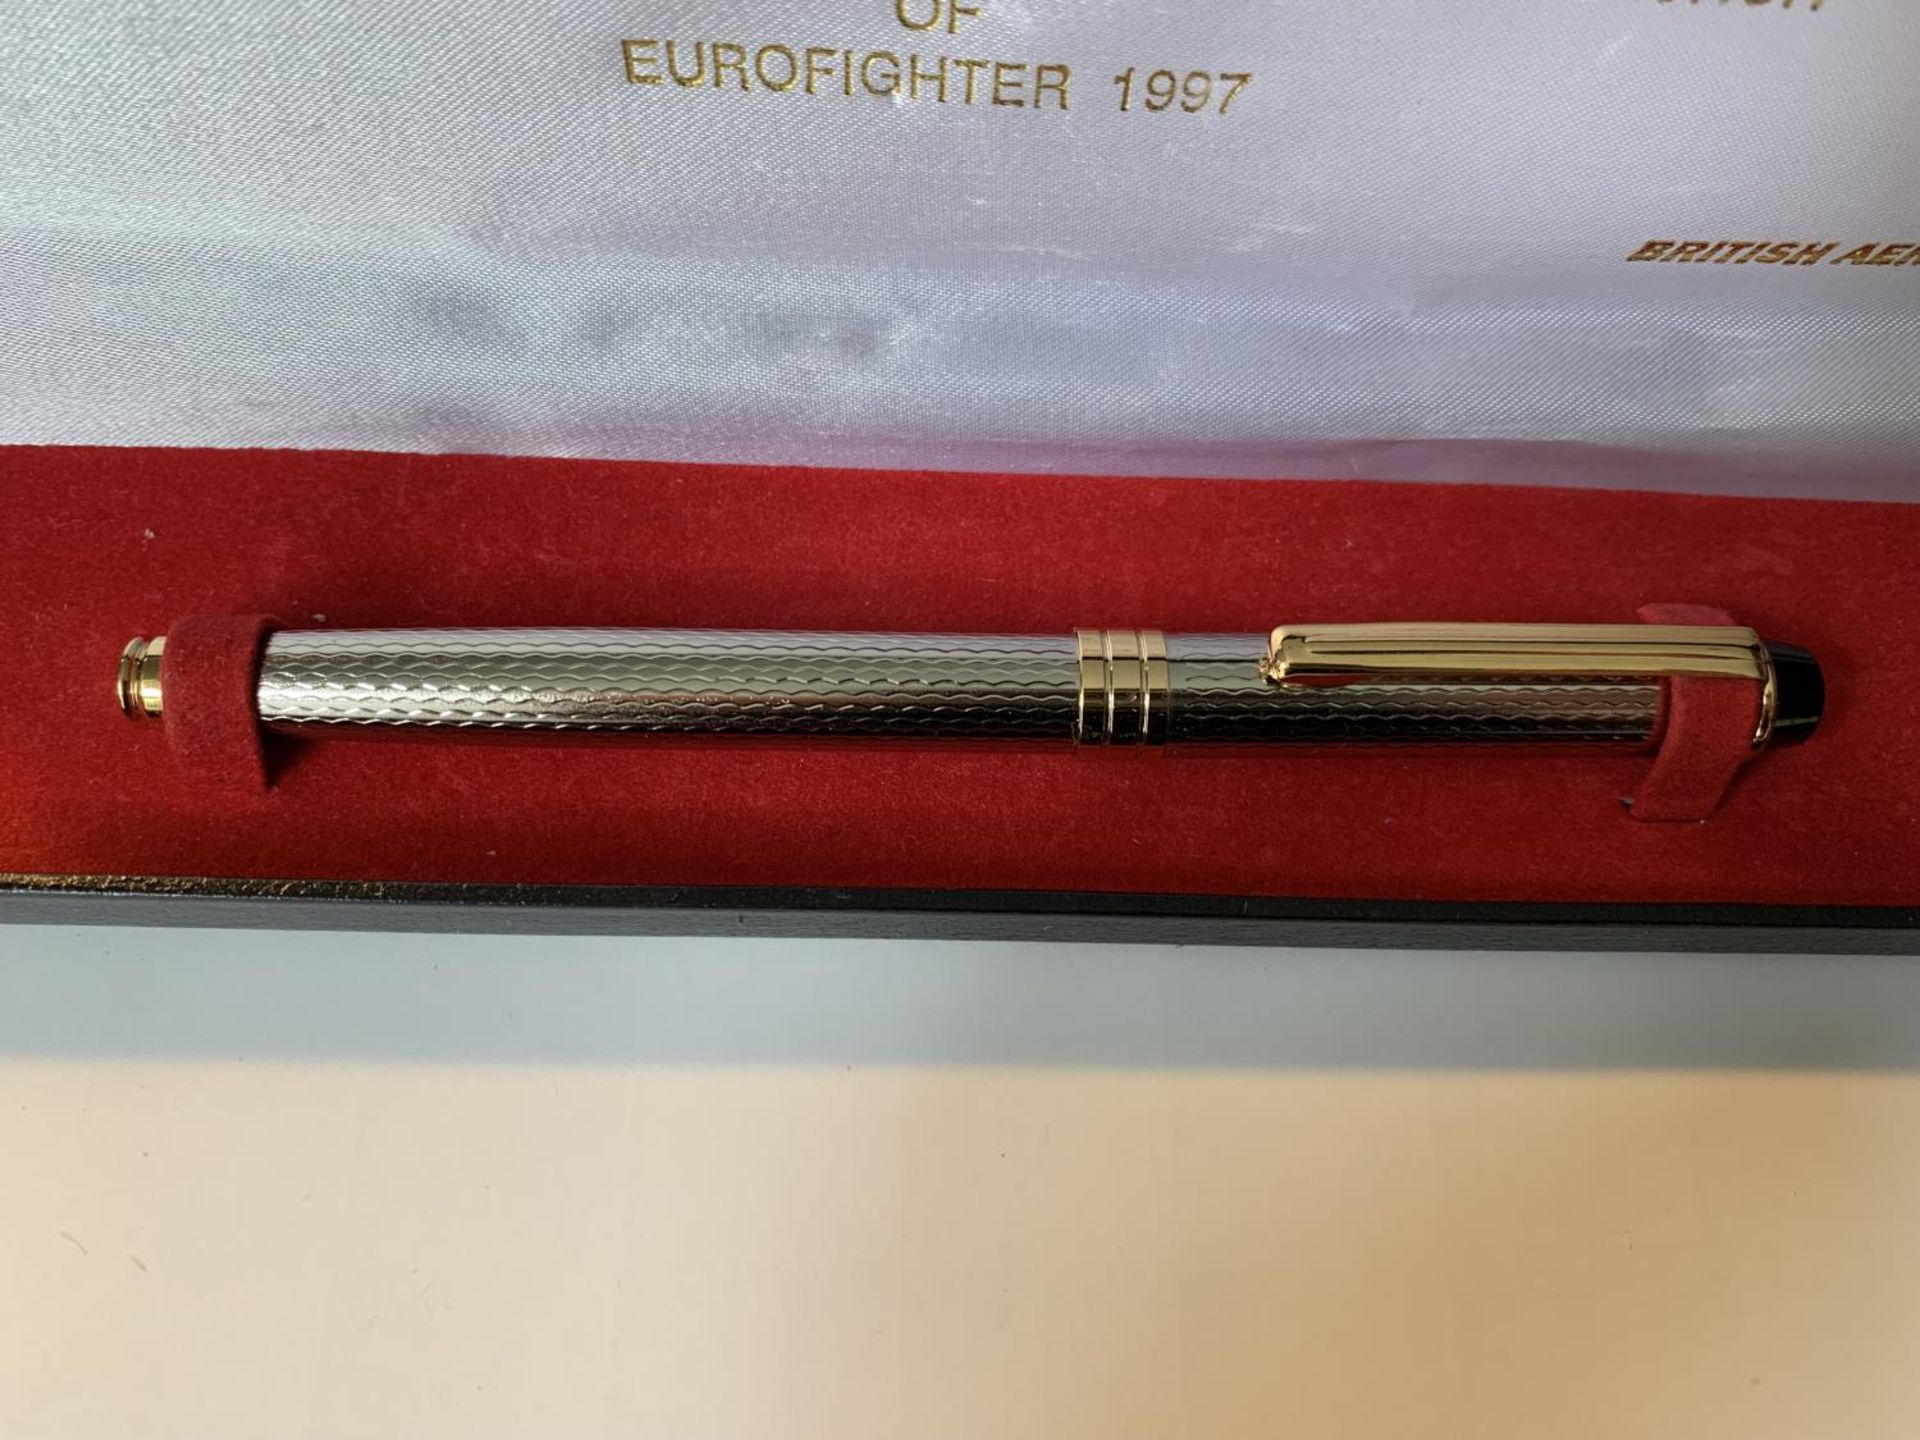 A BRITISH AEROSPACE FOUNTAIN PEN BOXED IN COMMEMORATION OF THE PRODUCTION LAUNCH OF EURO FIGHTER - Image 2 of 4